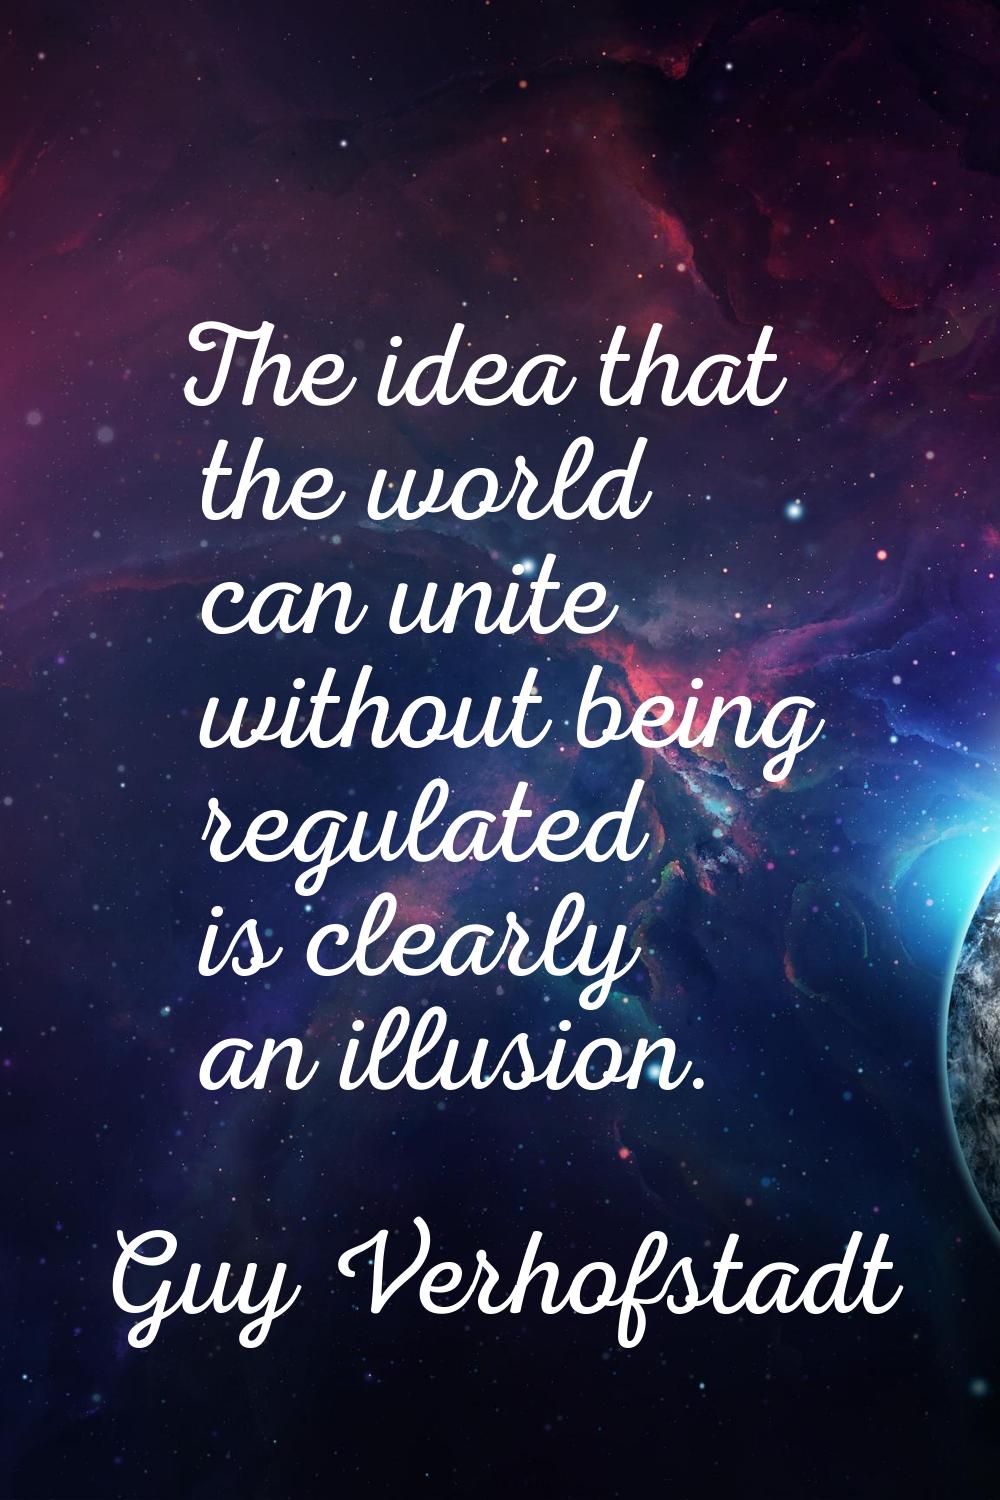 The idea that the world can unite without being regulated is clearly an illusion.